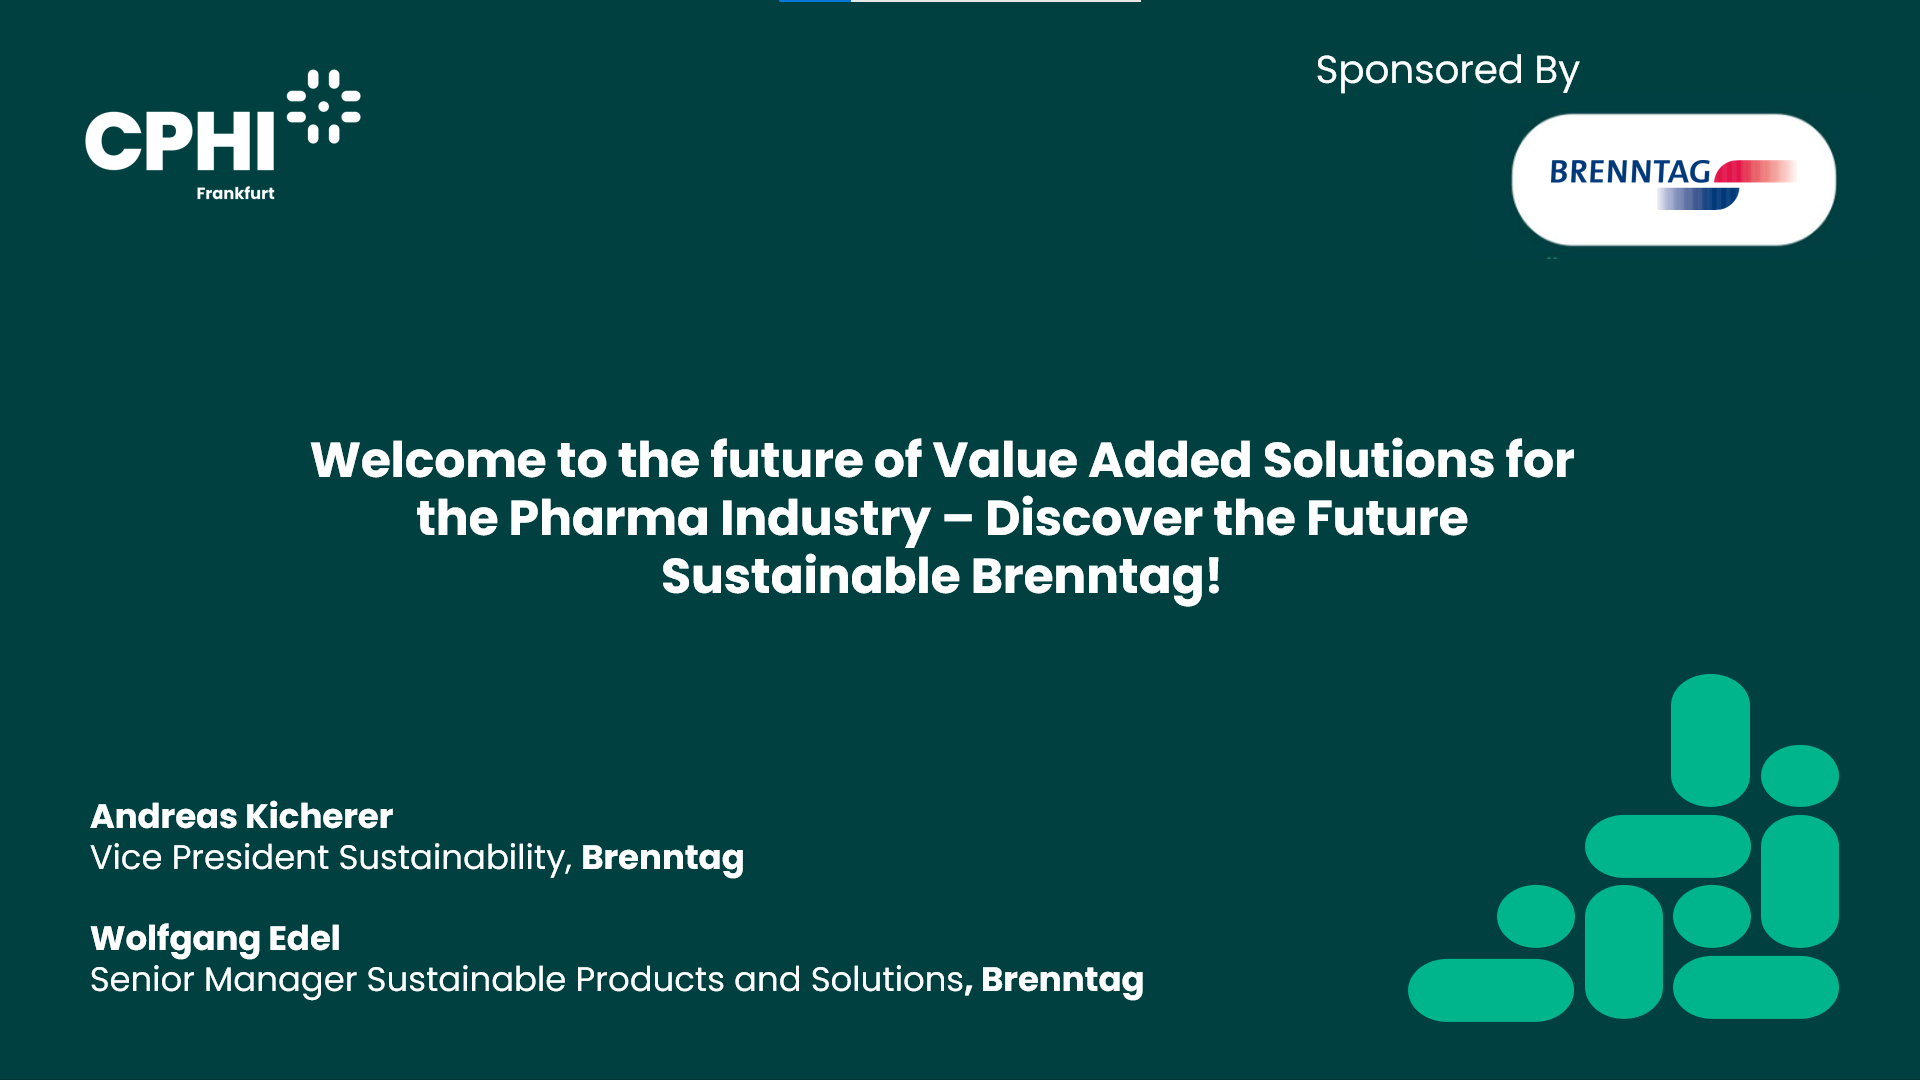 Welcome to the future of Value Added Solutions for the Pharma Industry – Discover the Future Sustainable Brenntag!